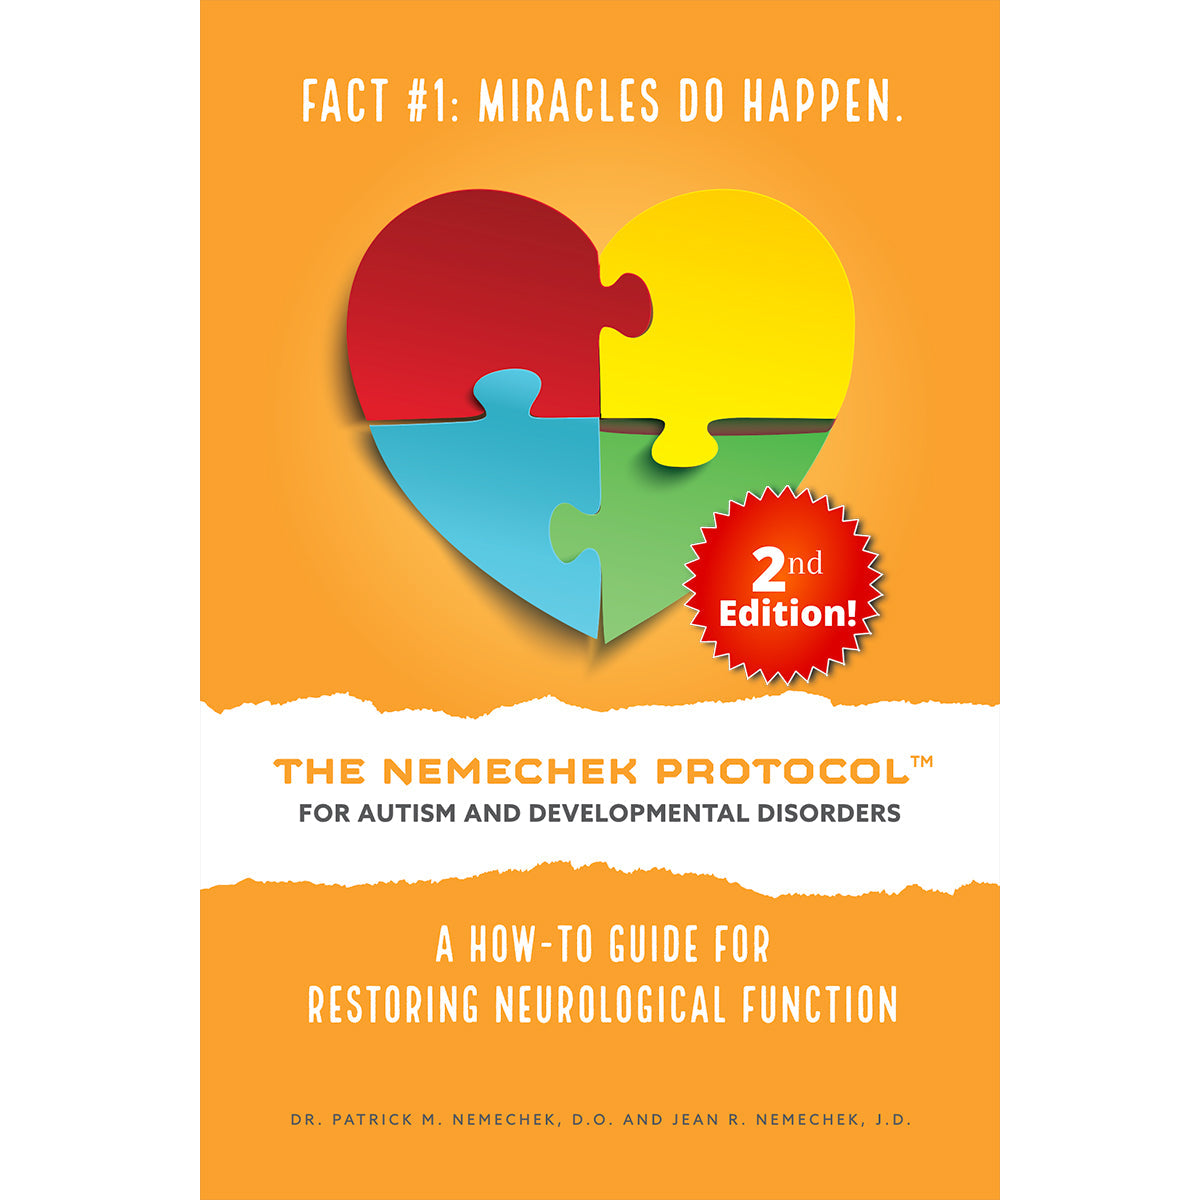 FREE GIFT - The Nemechek Protocol for Autism and Developmental Disorders